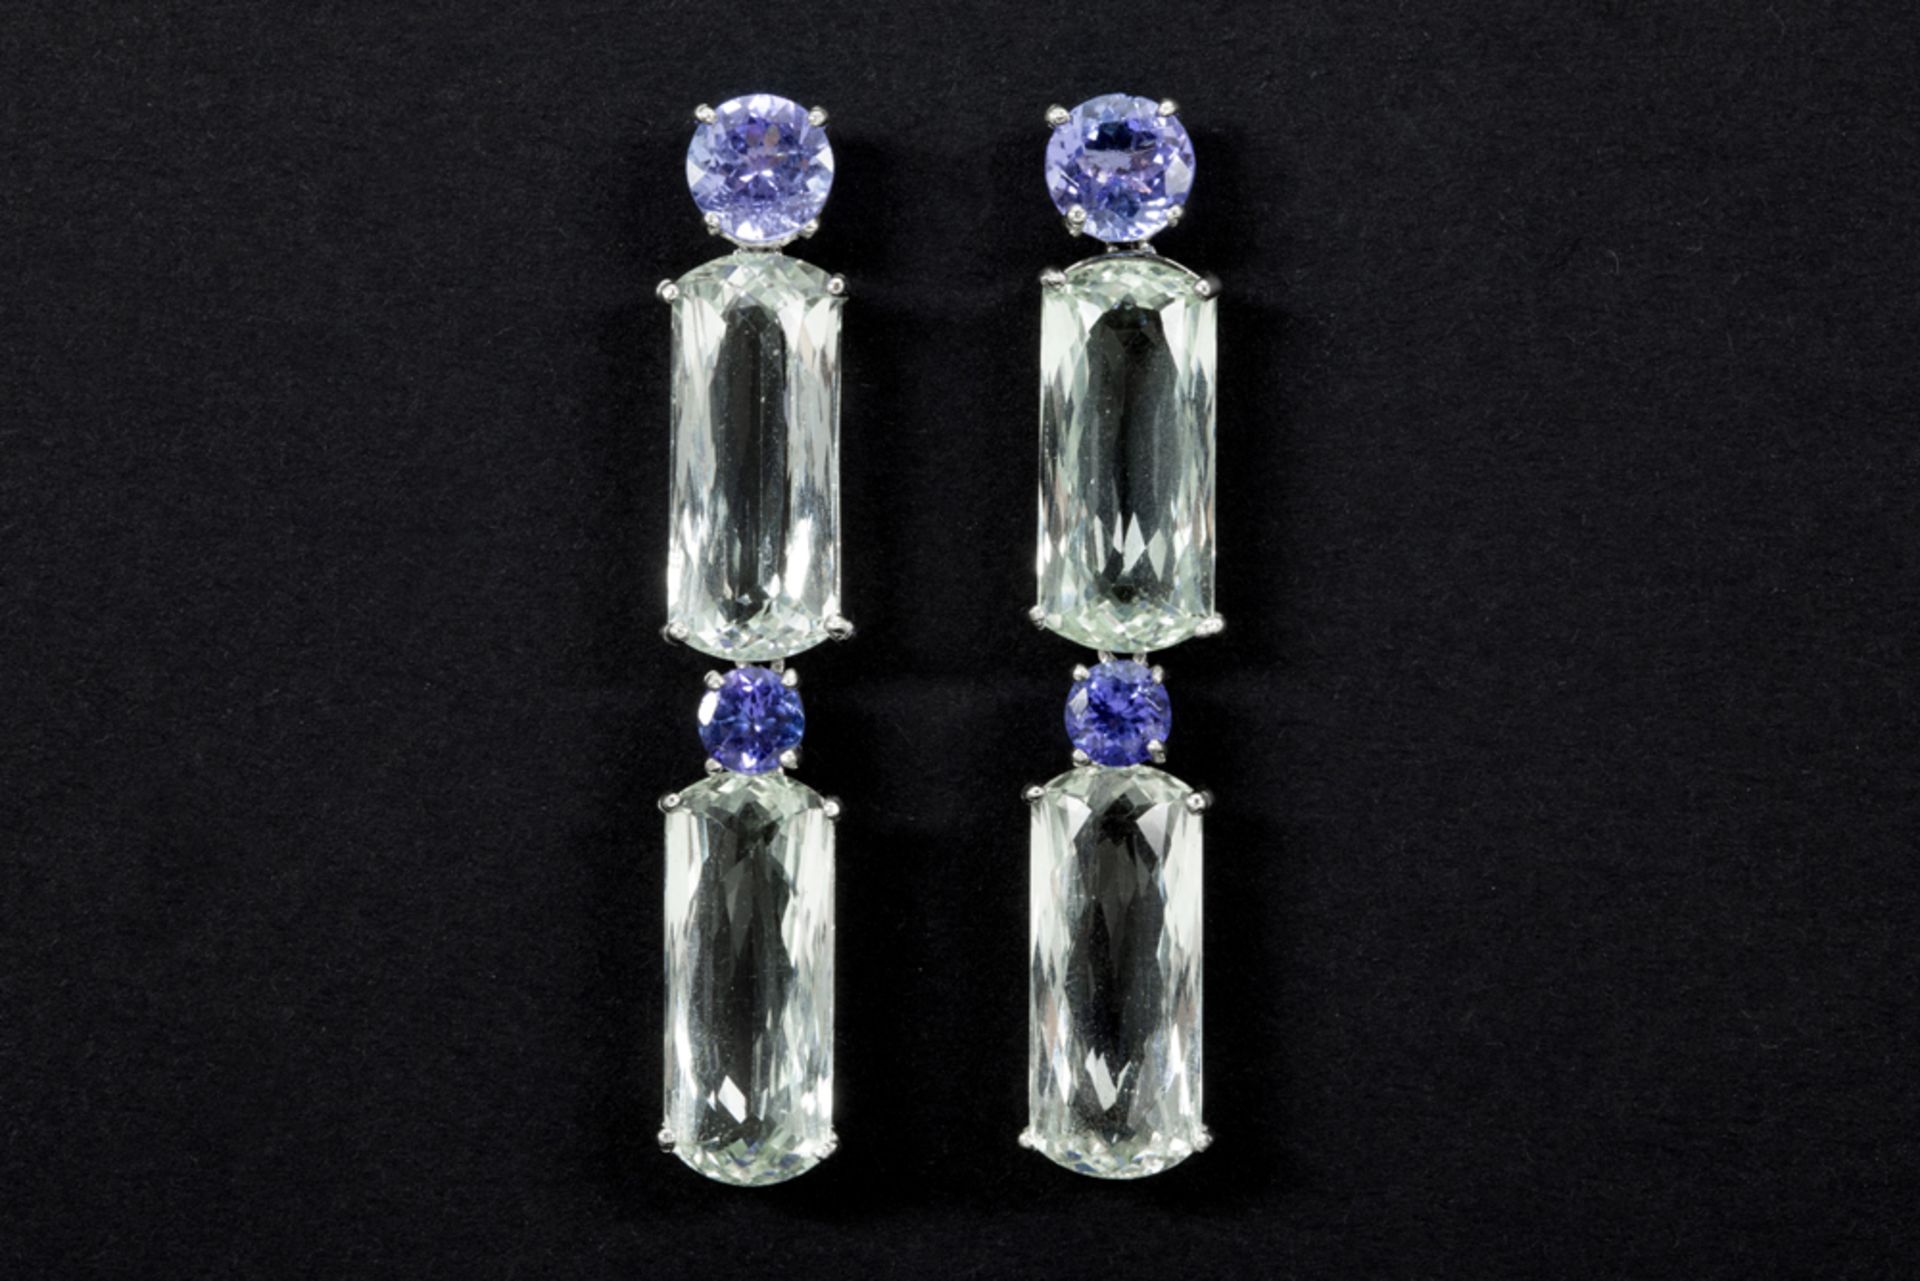 nice pair of quite long, handmade earrings in white gold (18 carat) each with two beam-shaped